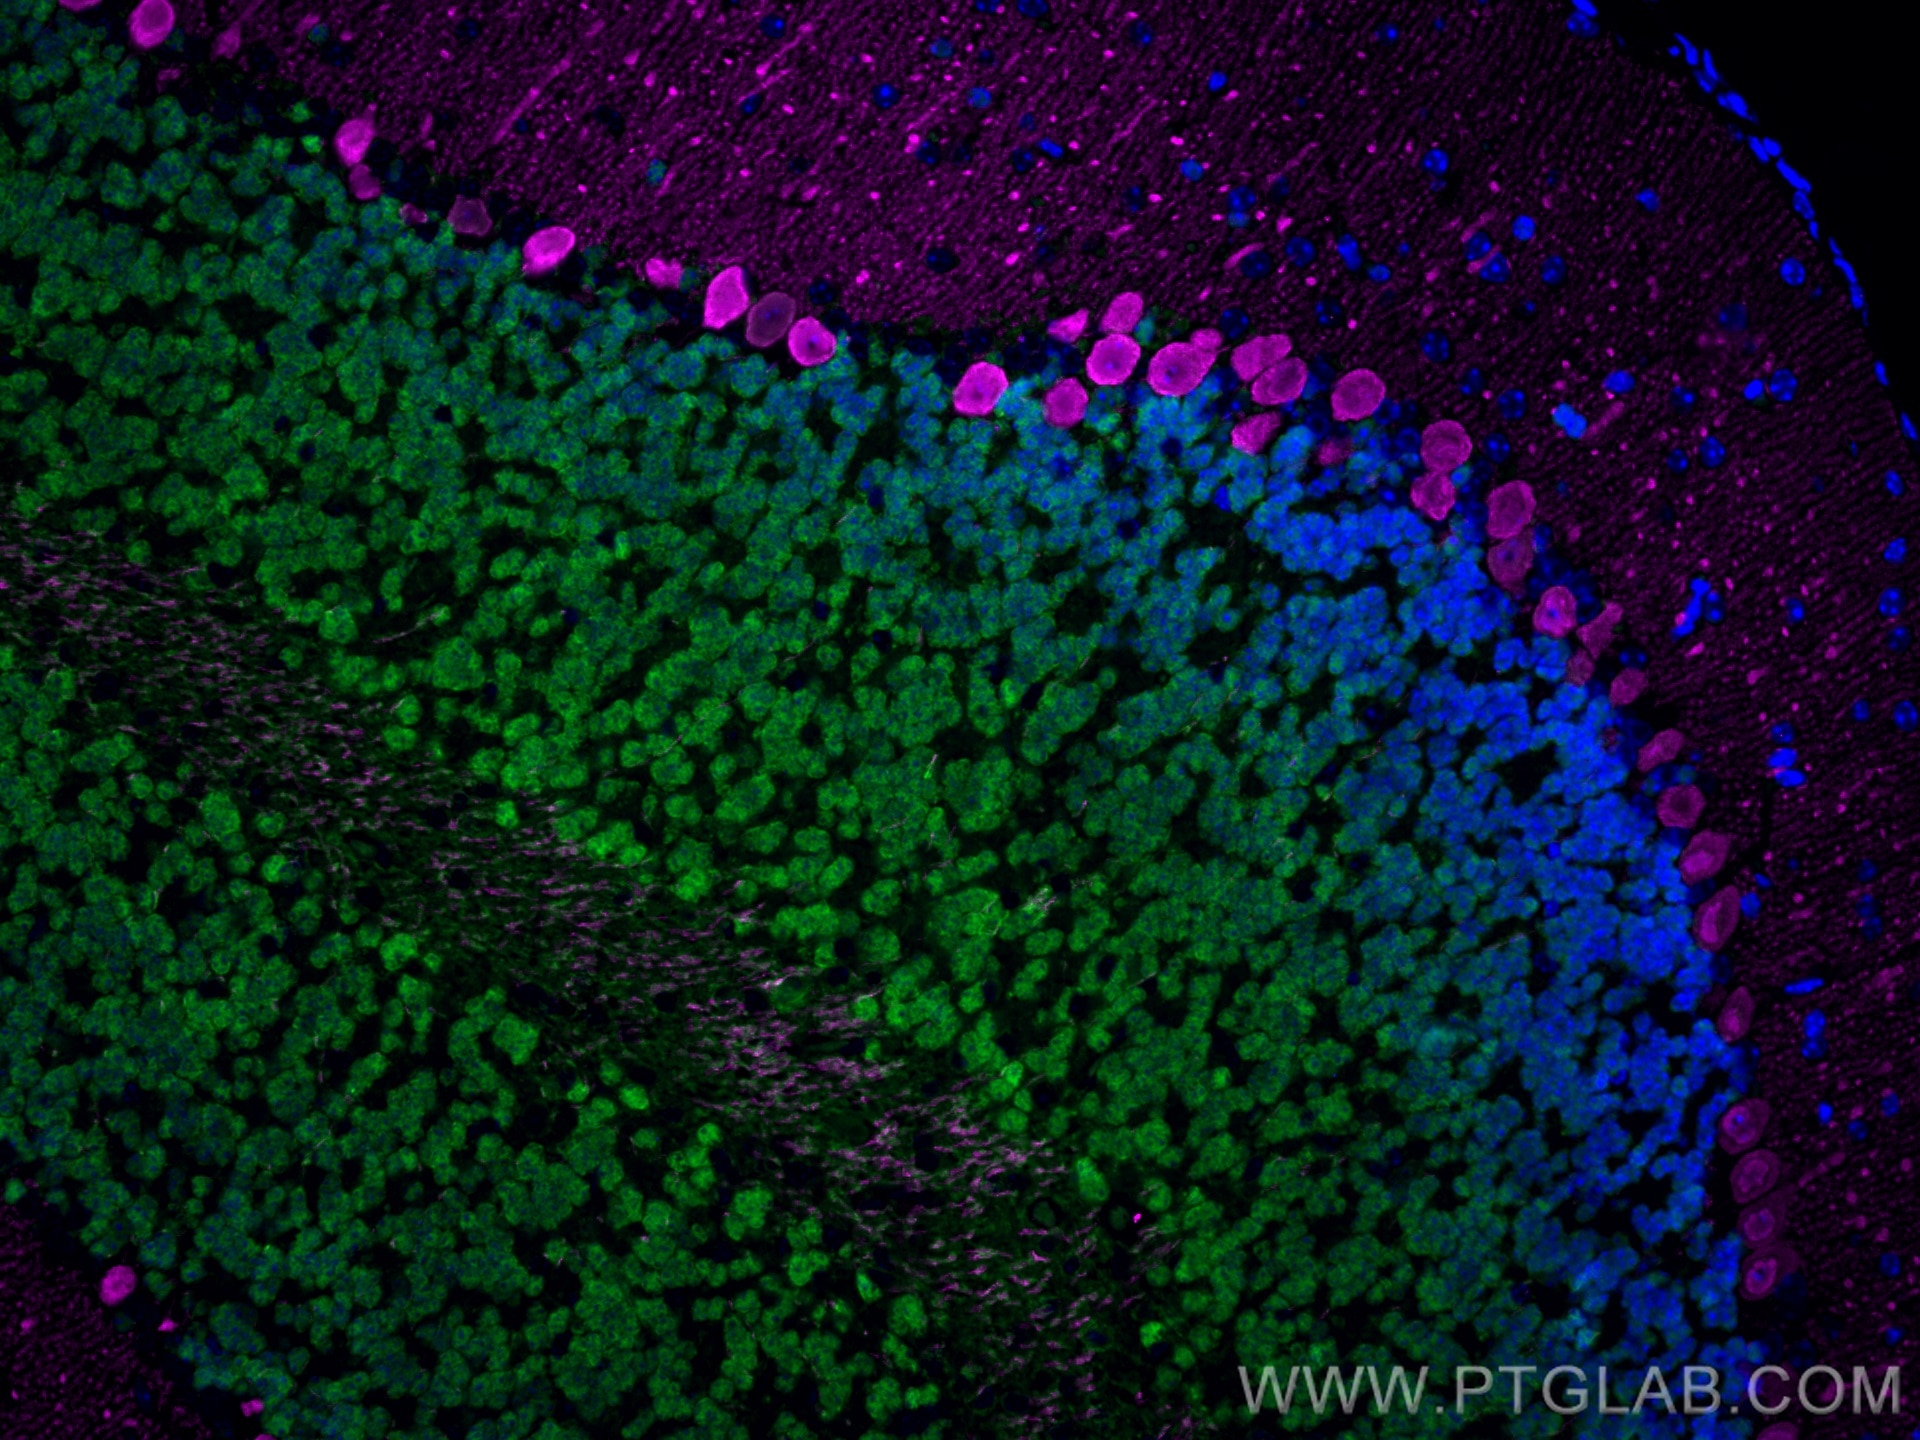 Immunofluorescence (IF) analysis of mouse cerebellum FFPE tissue stained with rabbit anti-NeuN polyclonal antibody (26975-1-AP, green) and mouse anti-Calbindin-D28k monoclonal antibody (66394-1-Ig, magenta). Multi-rAb CoraLite® Plus 488-Goat Anti-Rabbit Recombinant Secondary Antibody (H+L) (RGAM002, 1:500) and Multi-rAb CoraLite® Plus 647-Goat Anti-Mouse Recombinant Secondary Antibody (H+L) (RGAM005, 1:500) were used for detection.